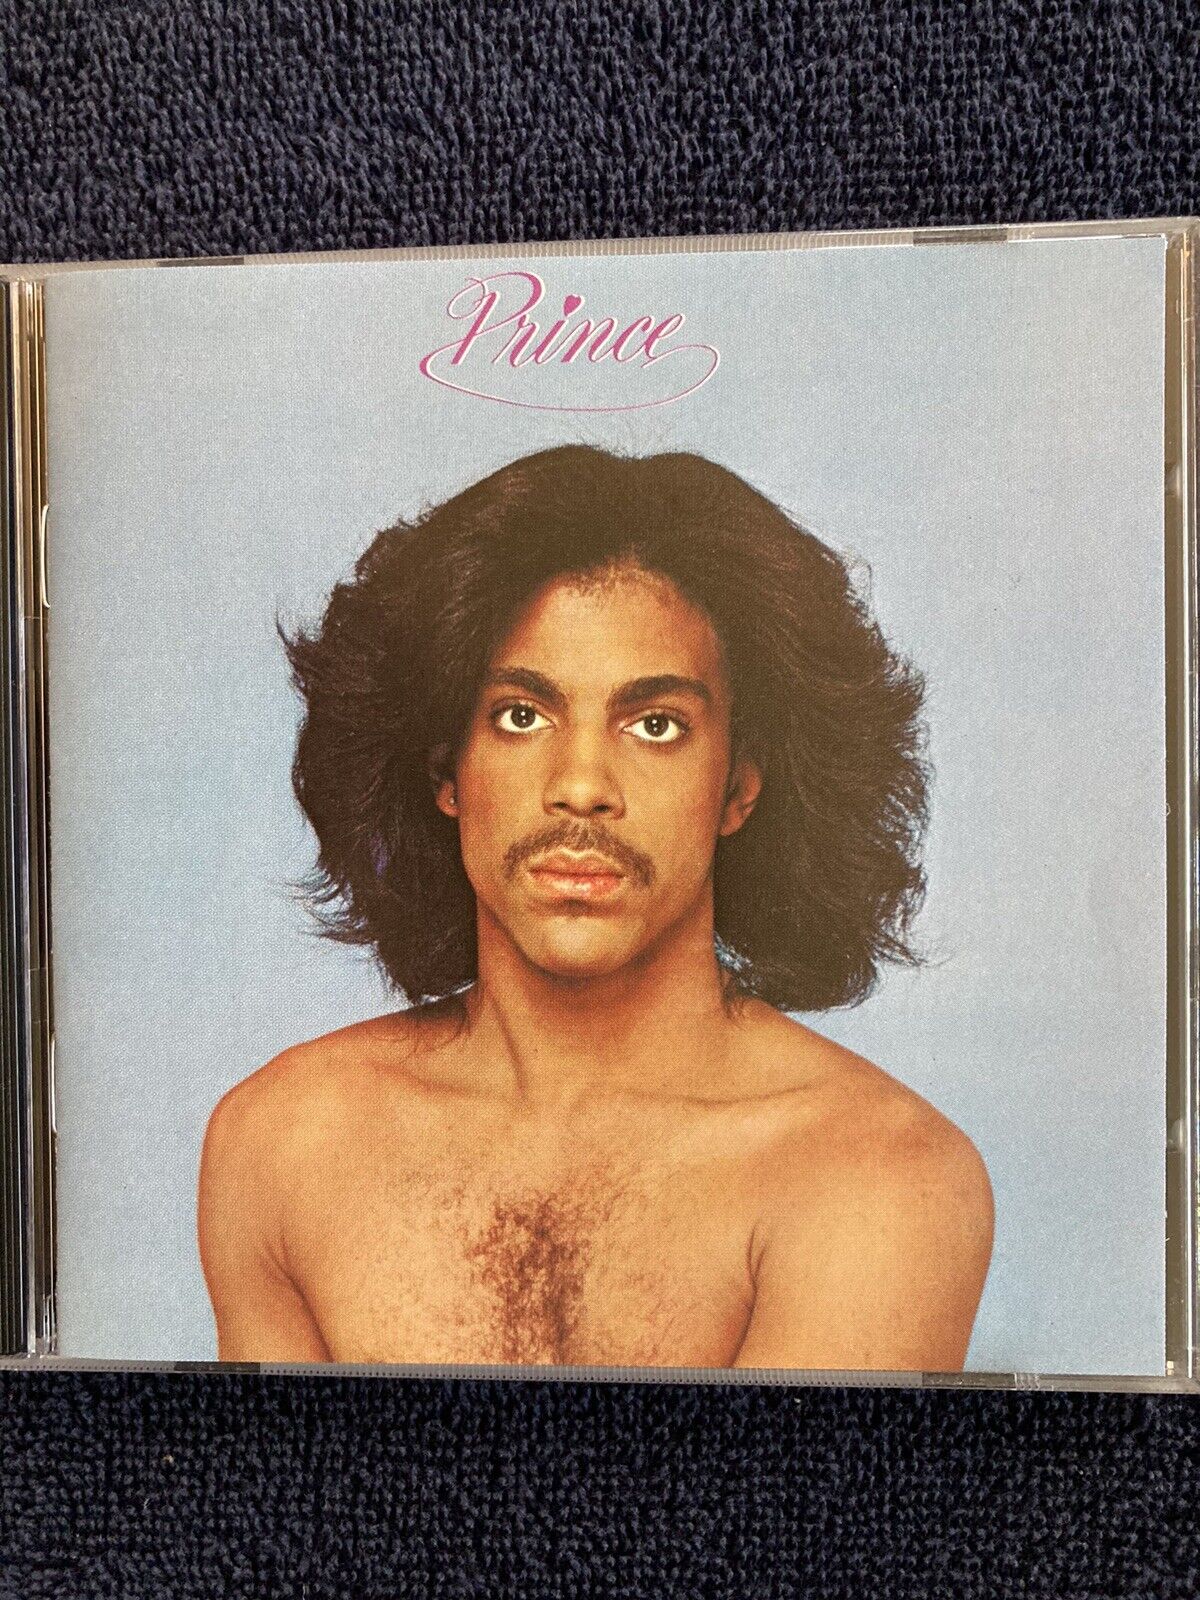 PRINCE~ Prince. 1990 Used Cd. Clean Copy  Swift Shipping